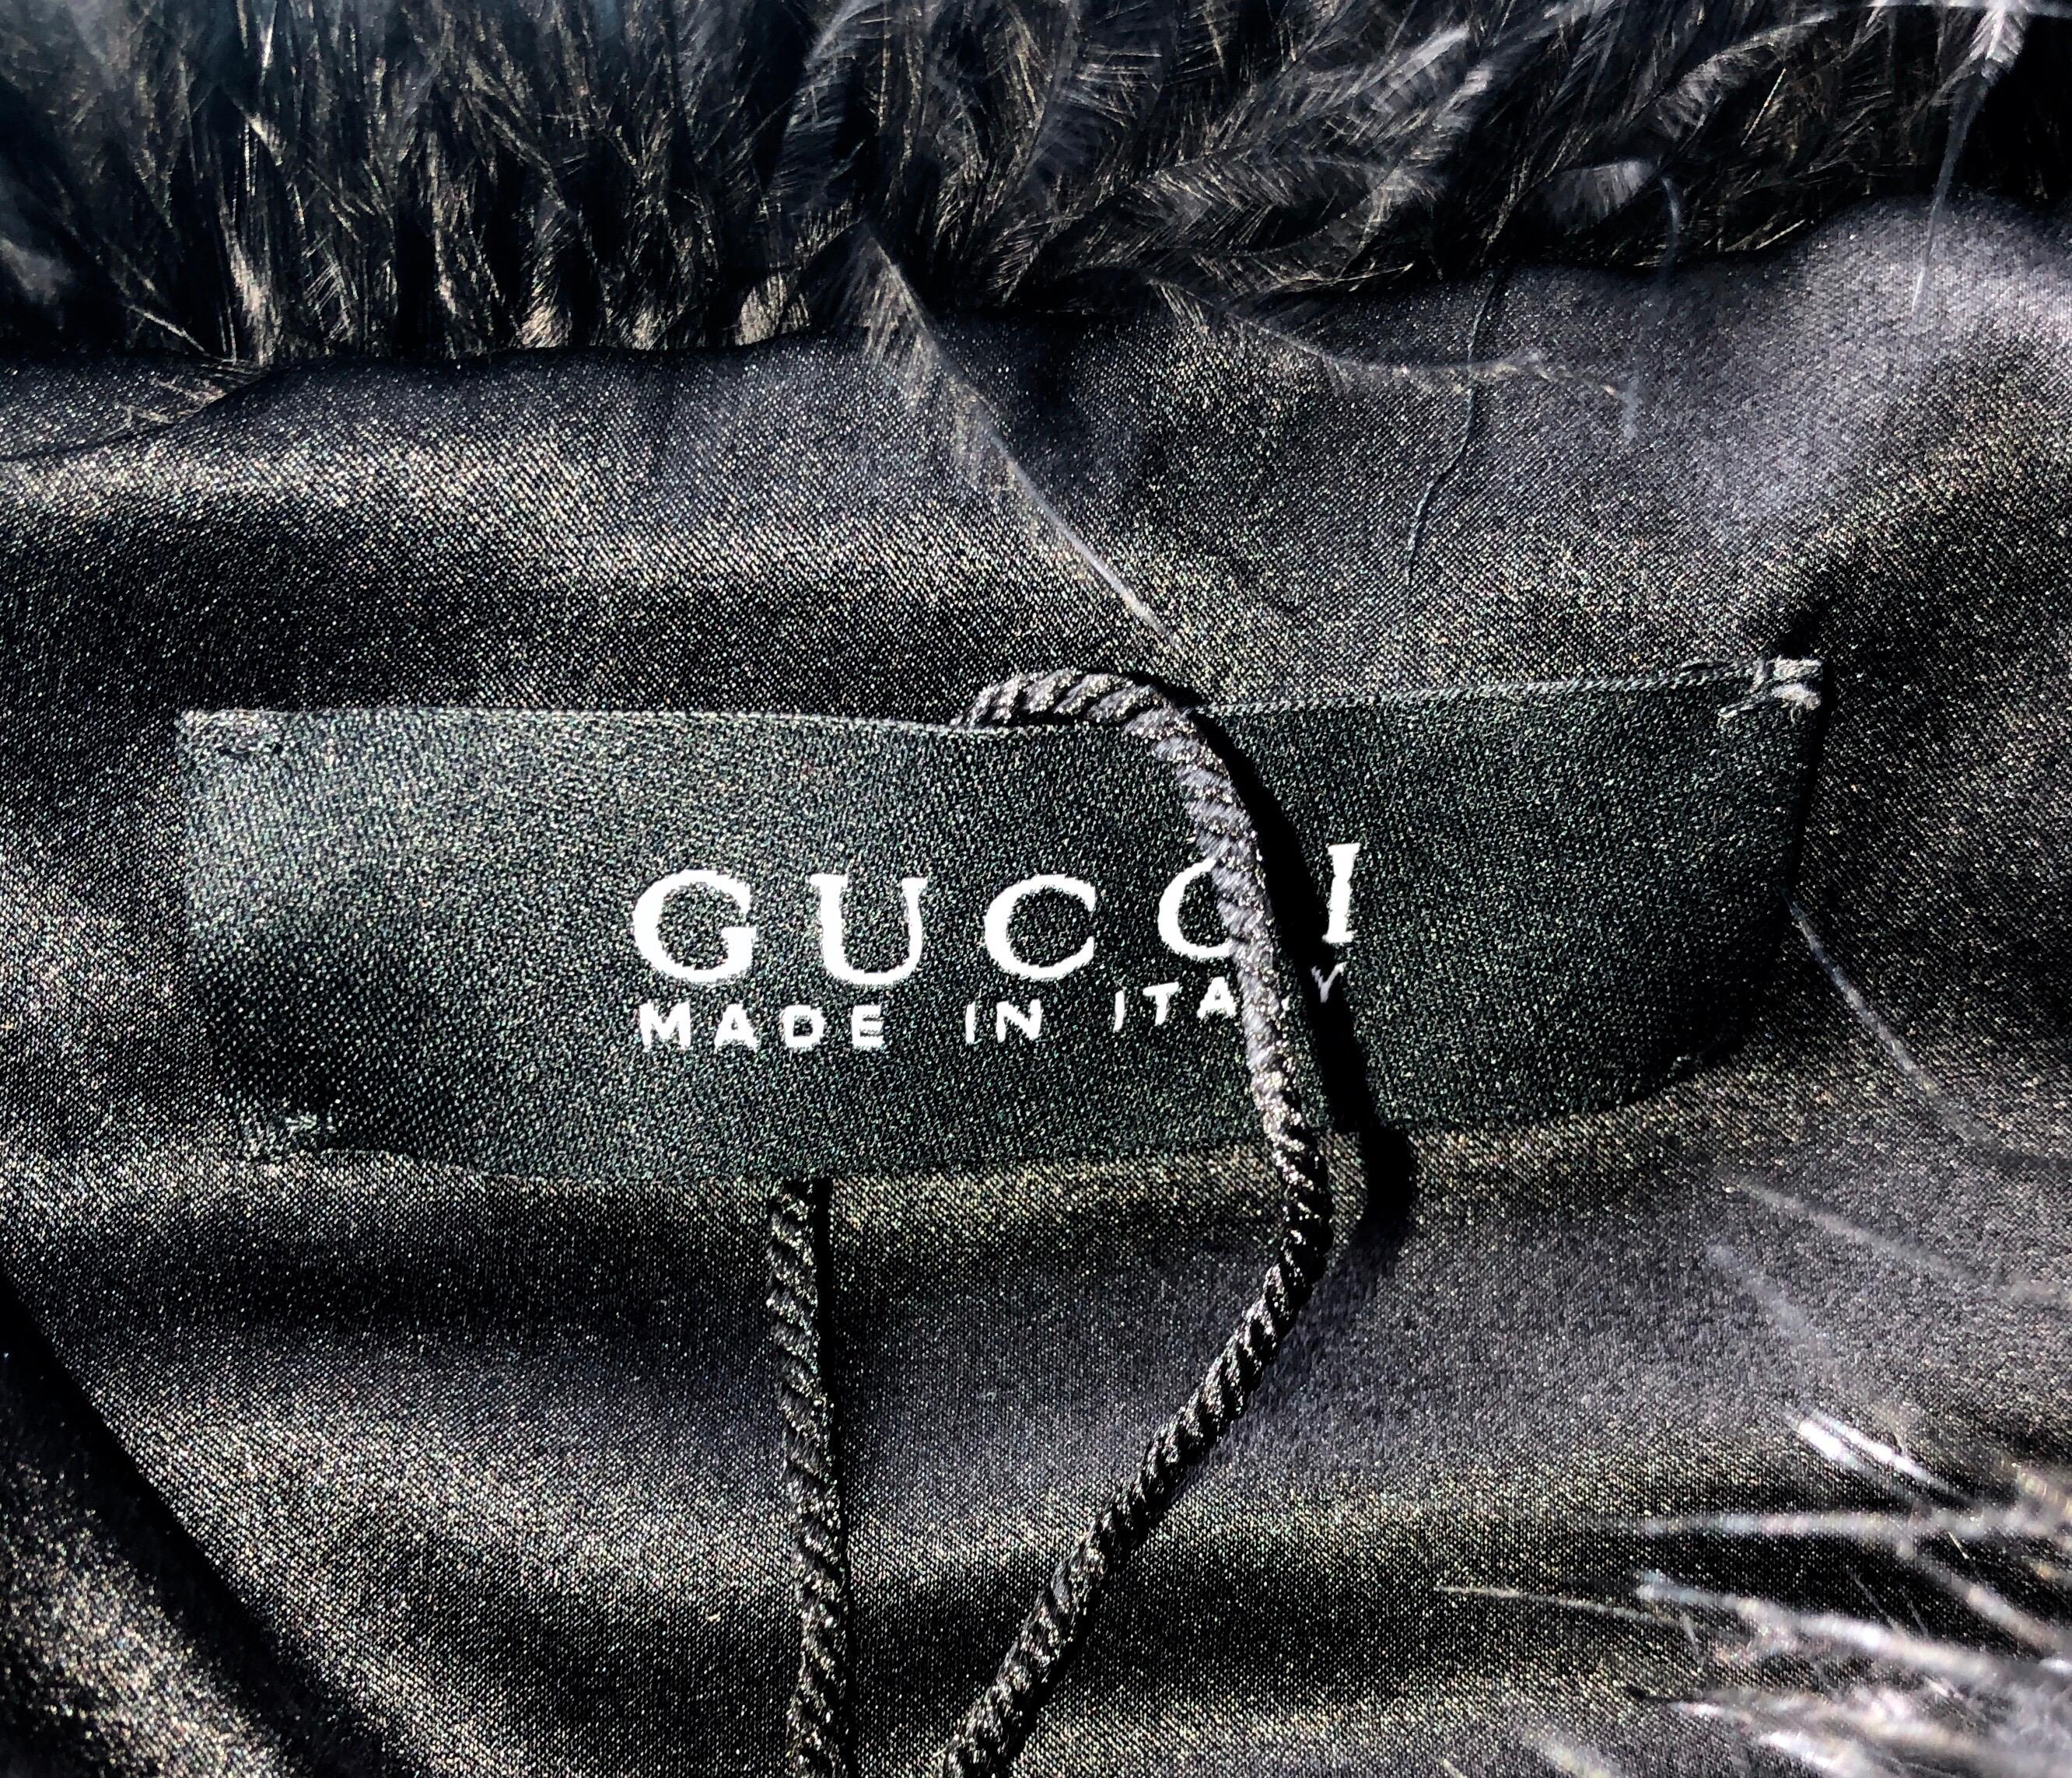 GORGEOUS

GUCCI BLACK MARABOU FEATHER JACKET

FROM TOM FORD'S LAST SUMMER COLLECTION FOR GUCCI IN 2004

COLLECTOR'S PIECE

SHOWN ON RUNWAY SHOW SS 2004 AS WELL AS IN THE GUCCI AD CAMPAIGN

ONLY VERY FEW PIECES MADE
SOLD OUT IMMEDIATELY

This